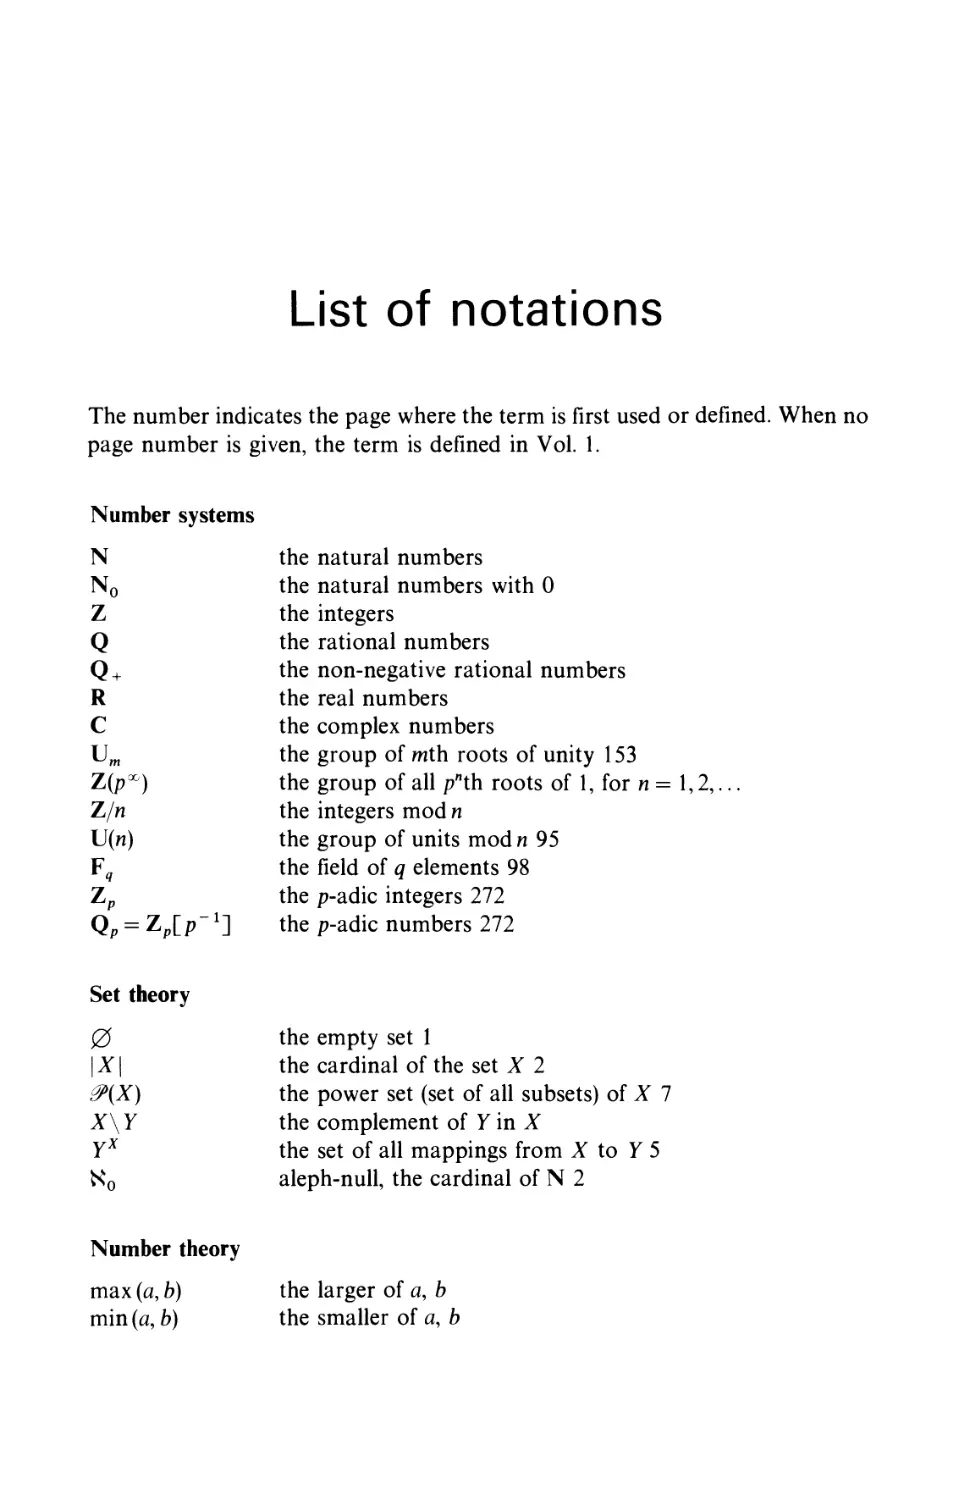 List of notations